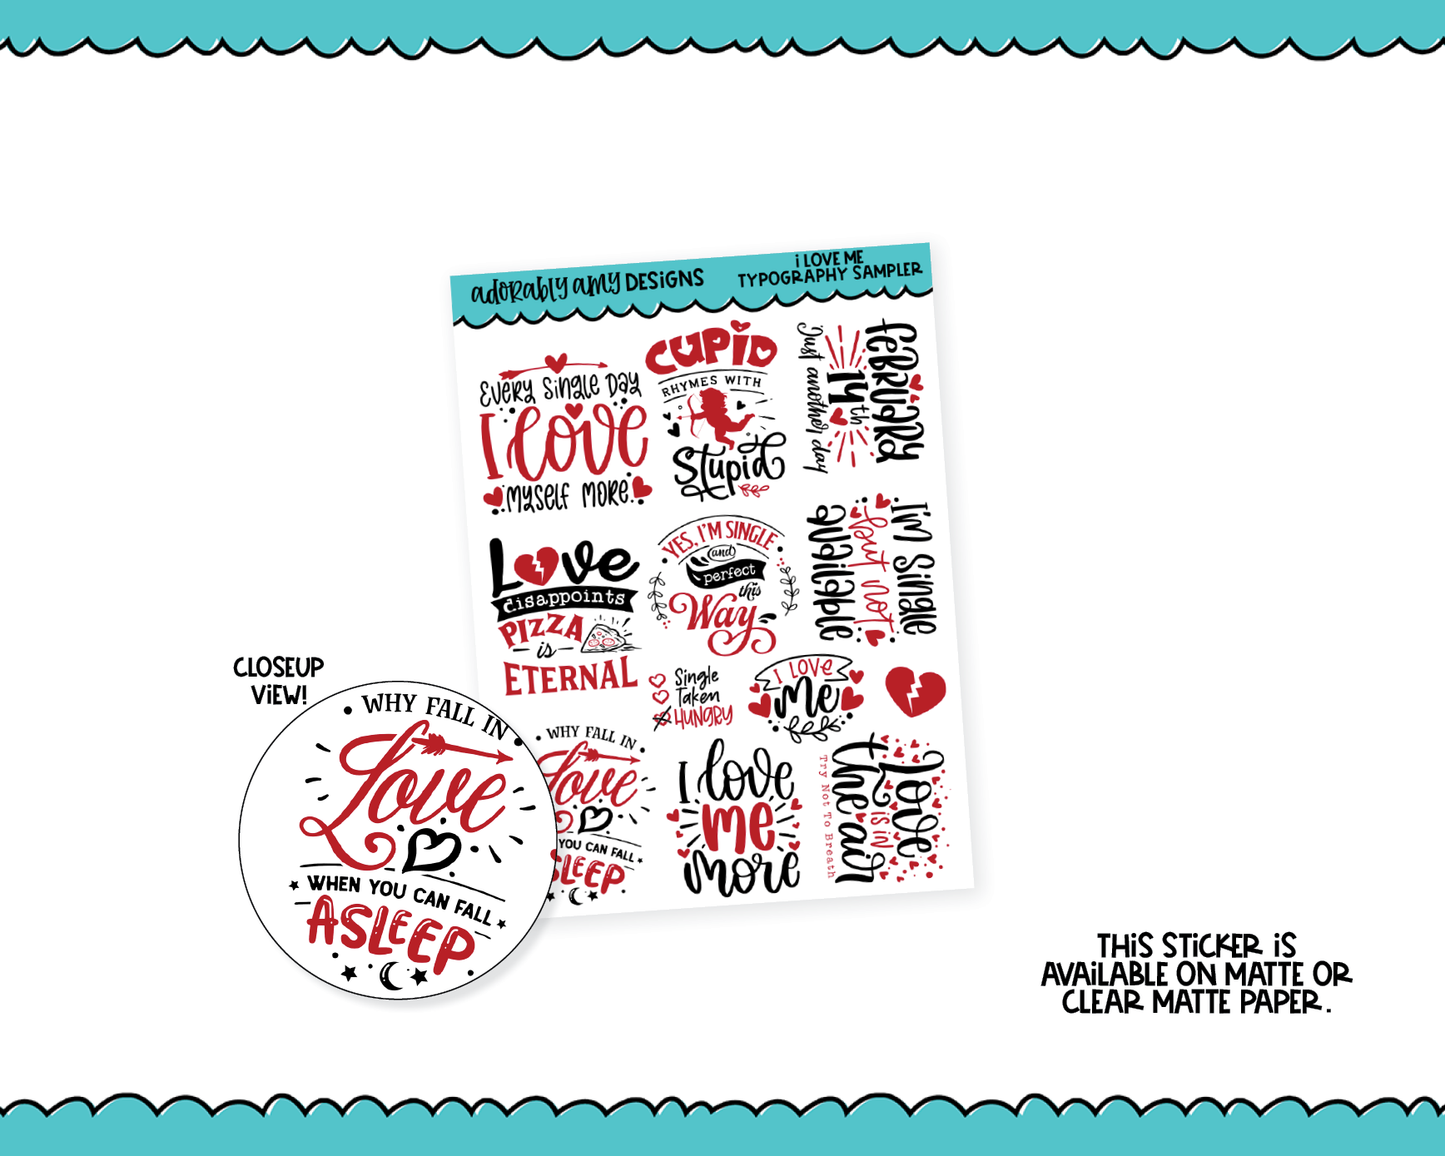 I Love Me Anti-Valentine No Thanks to Love Quote Sampler Planner Stickers for any Planner or Insert